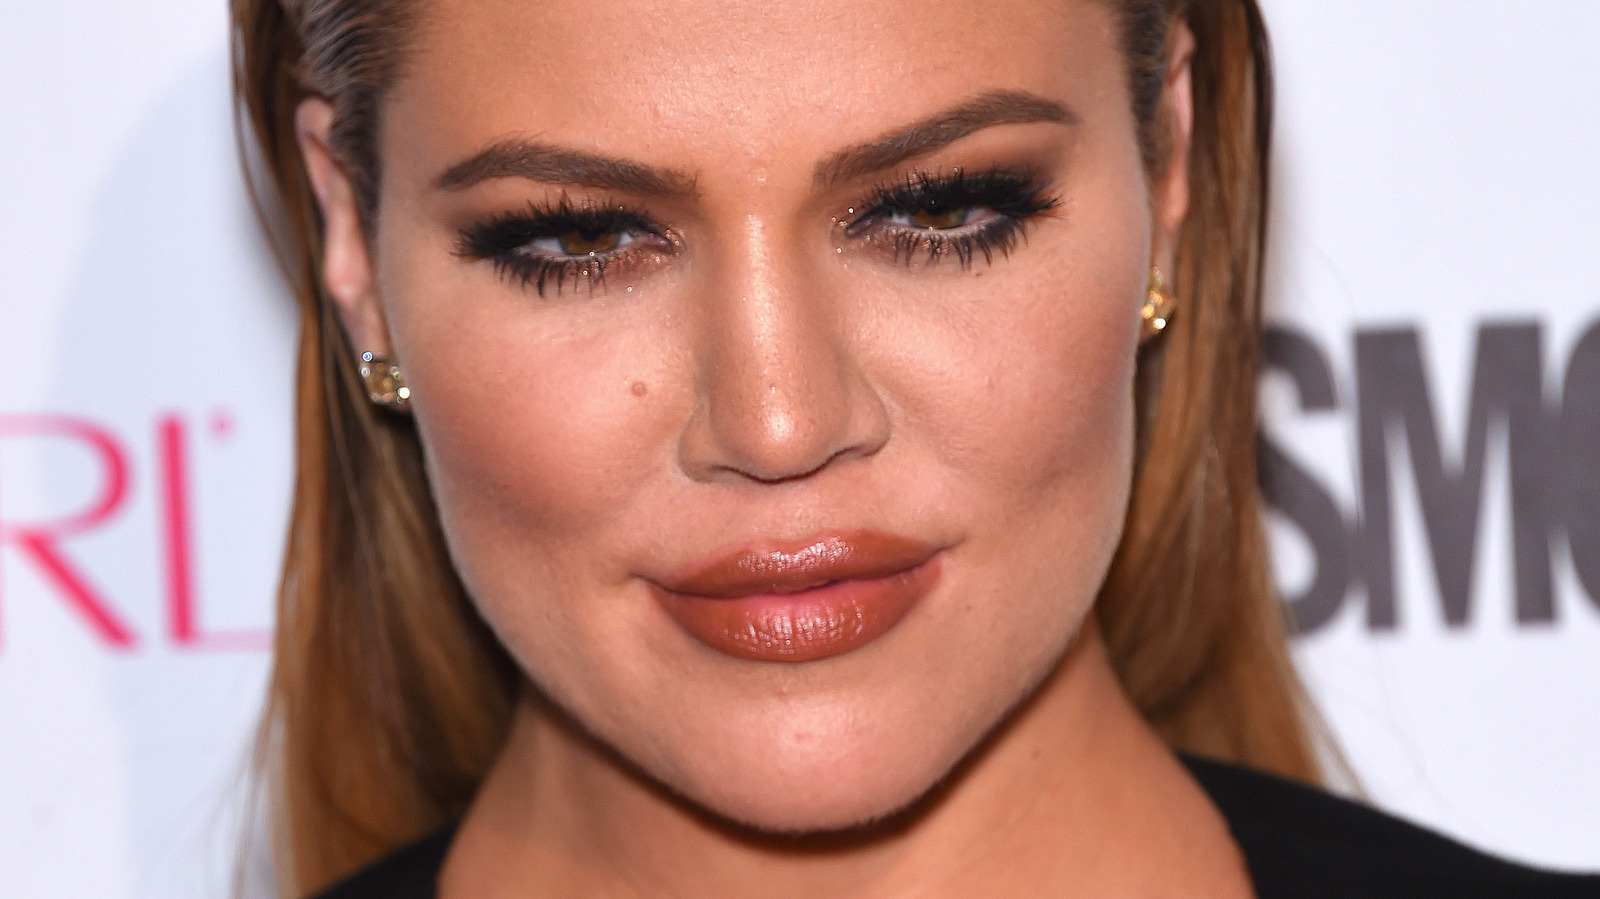 Khloe Kardashian Is Facing A New Round Of Body Related Rumors